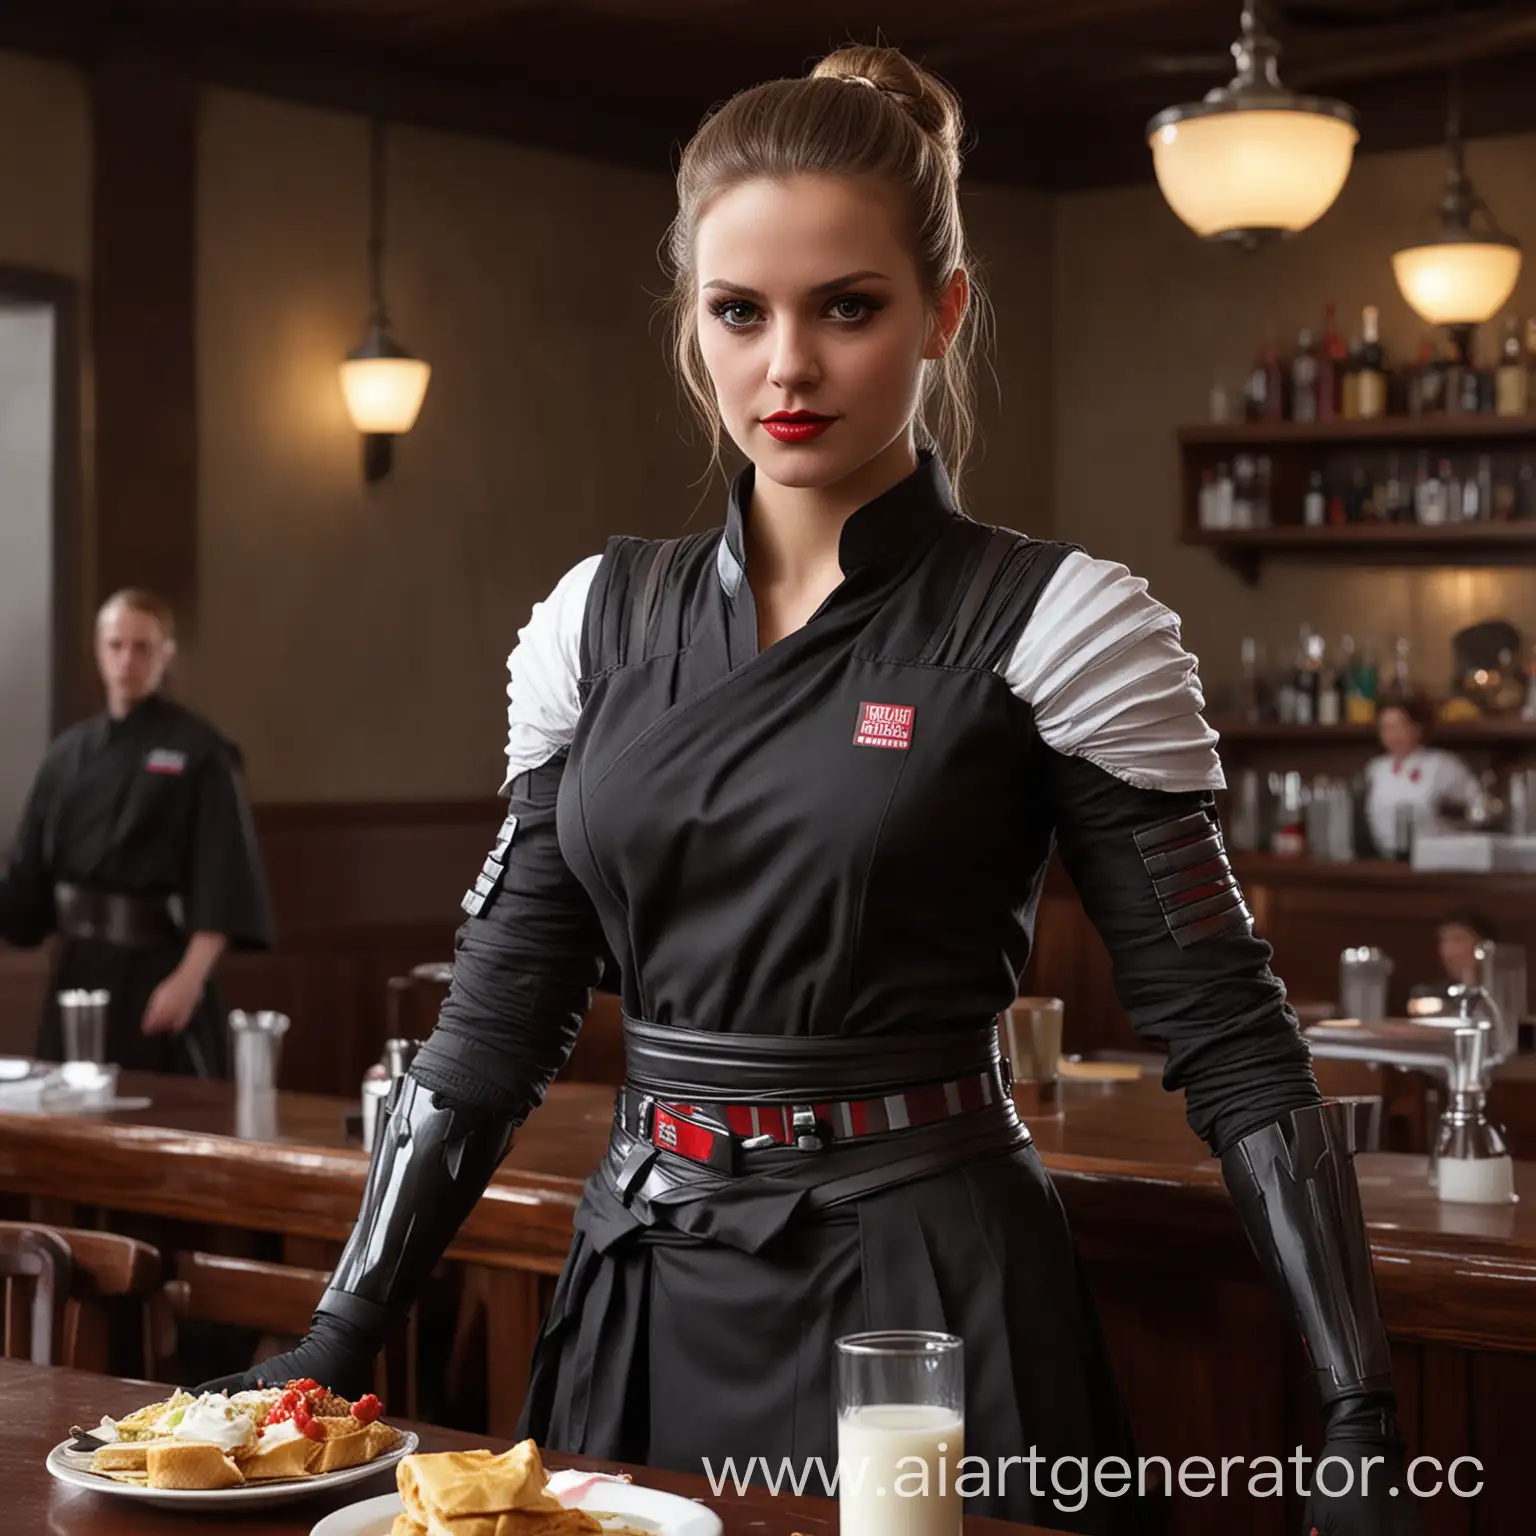 Waitress-Taking-Orders-in-a-Stylish-Cafe-Setting